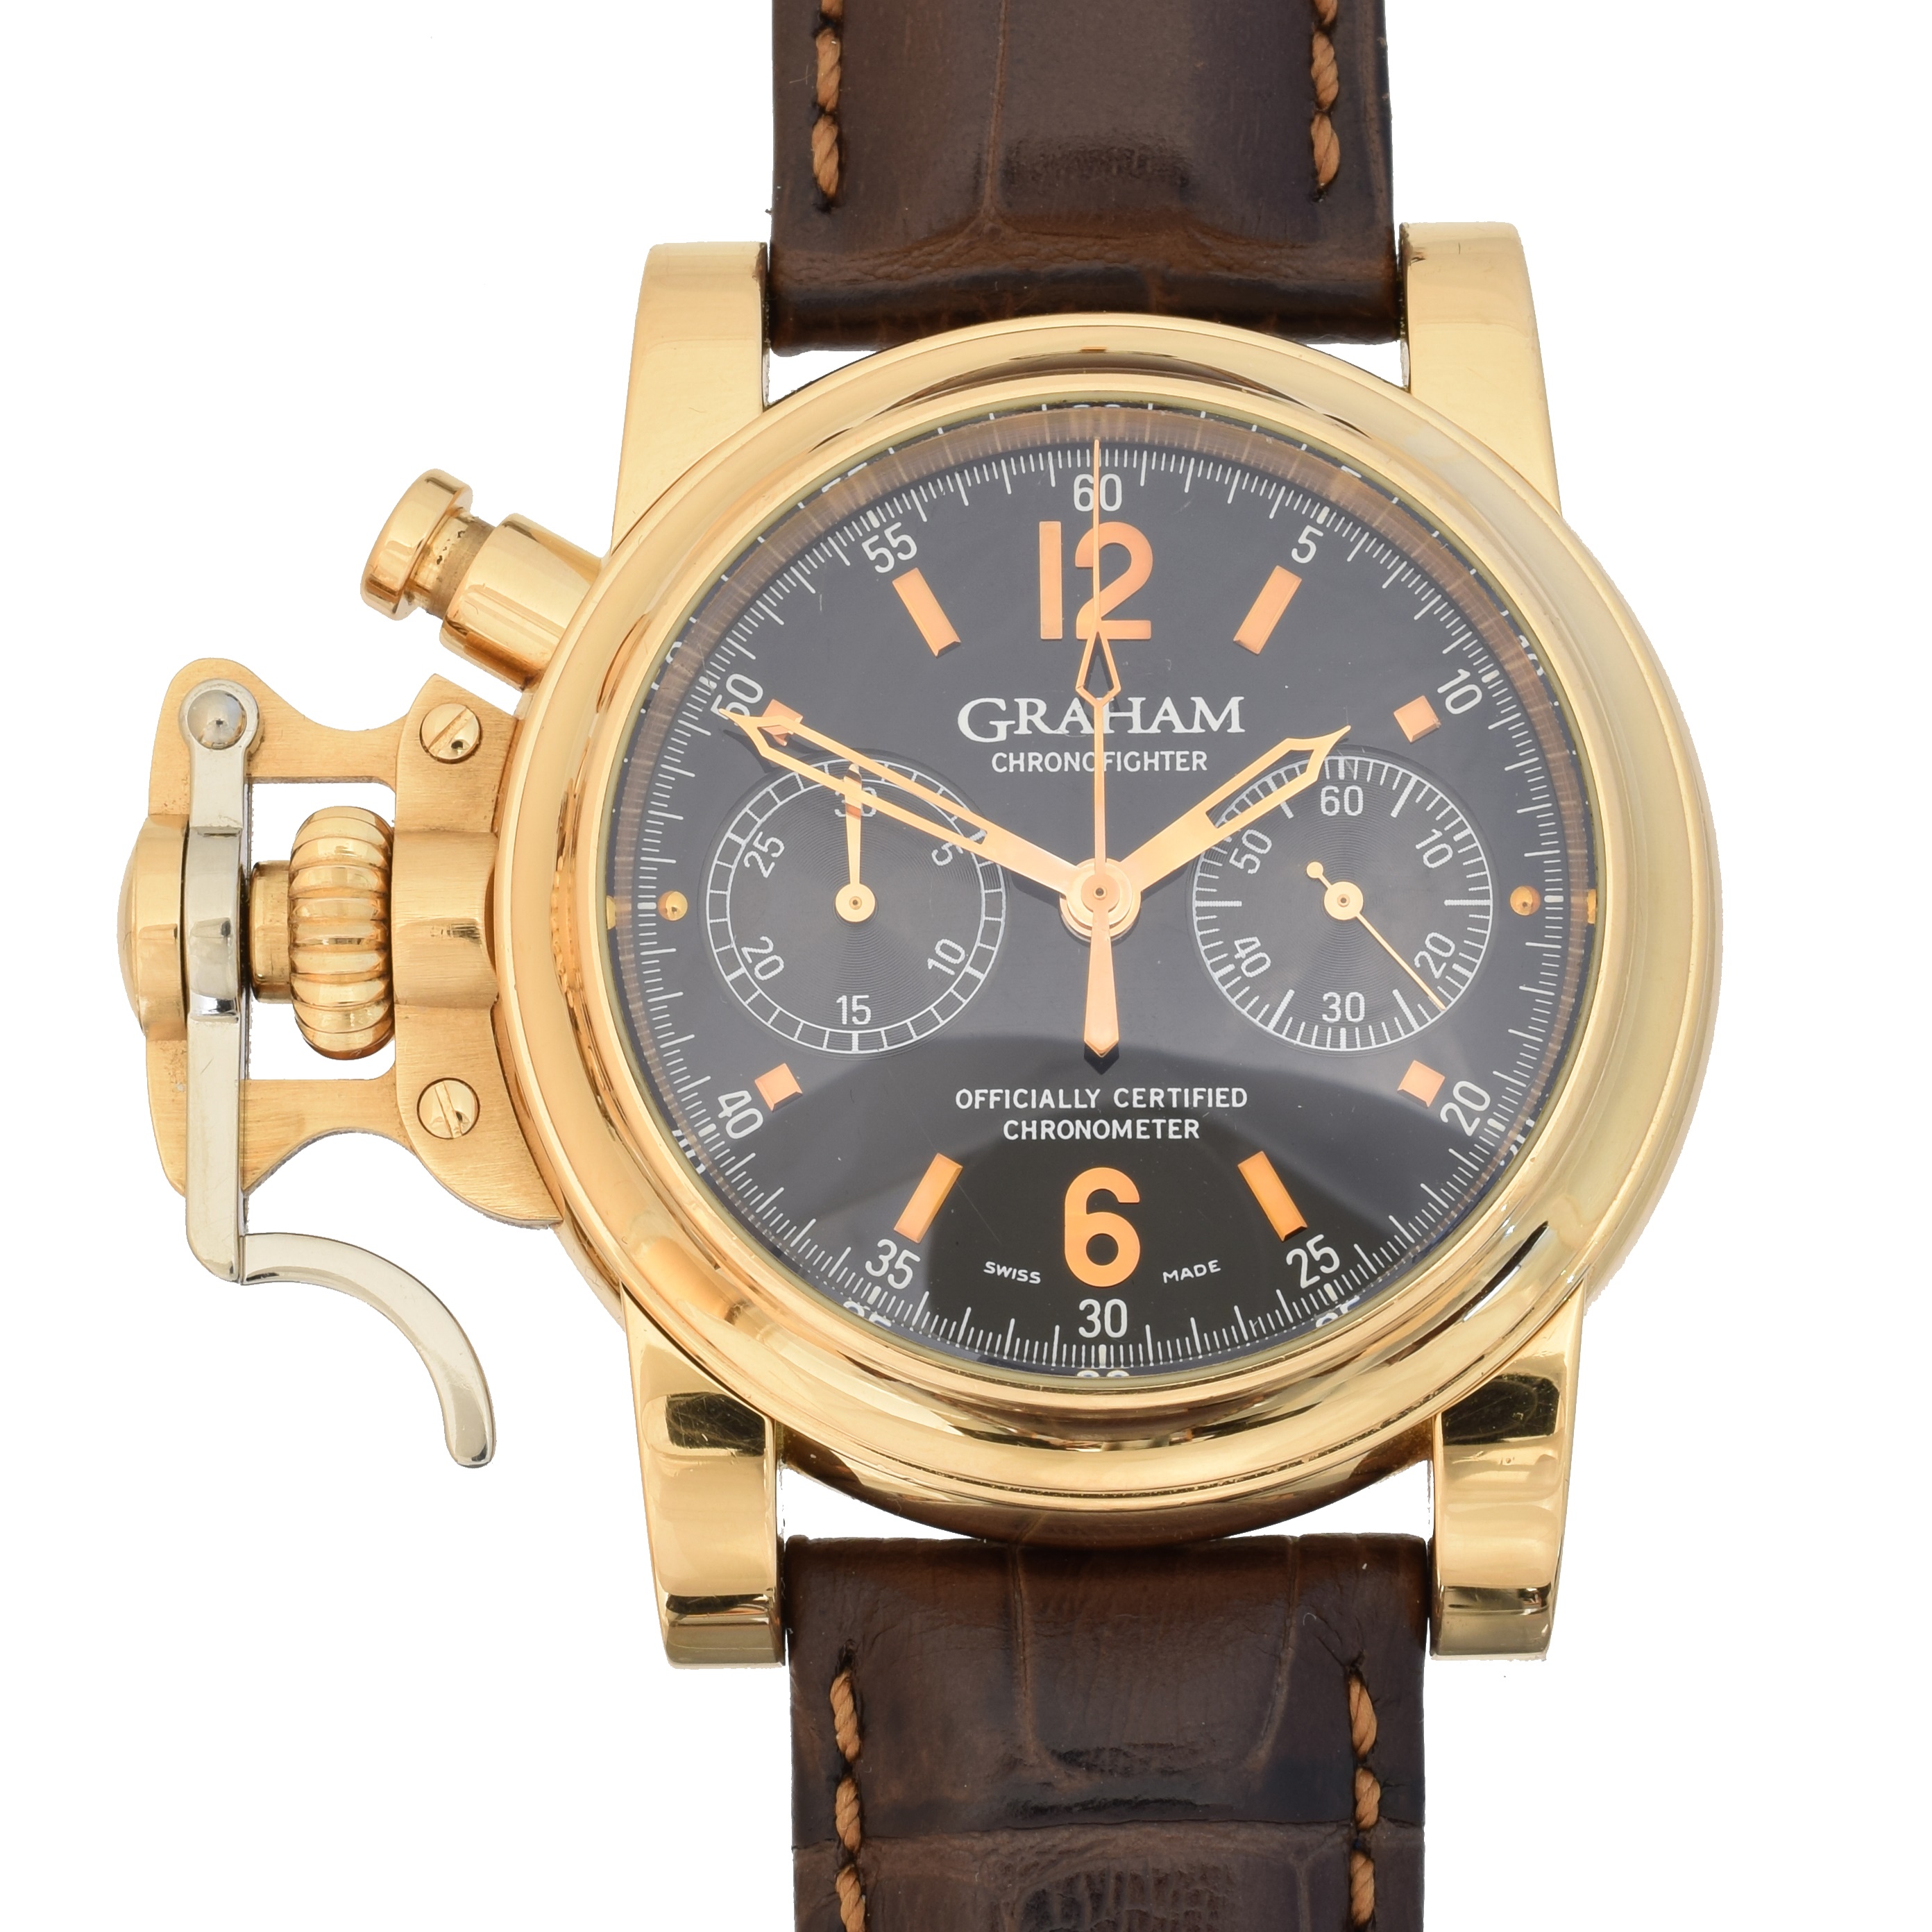 Graham Chronofighter watch auction